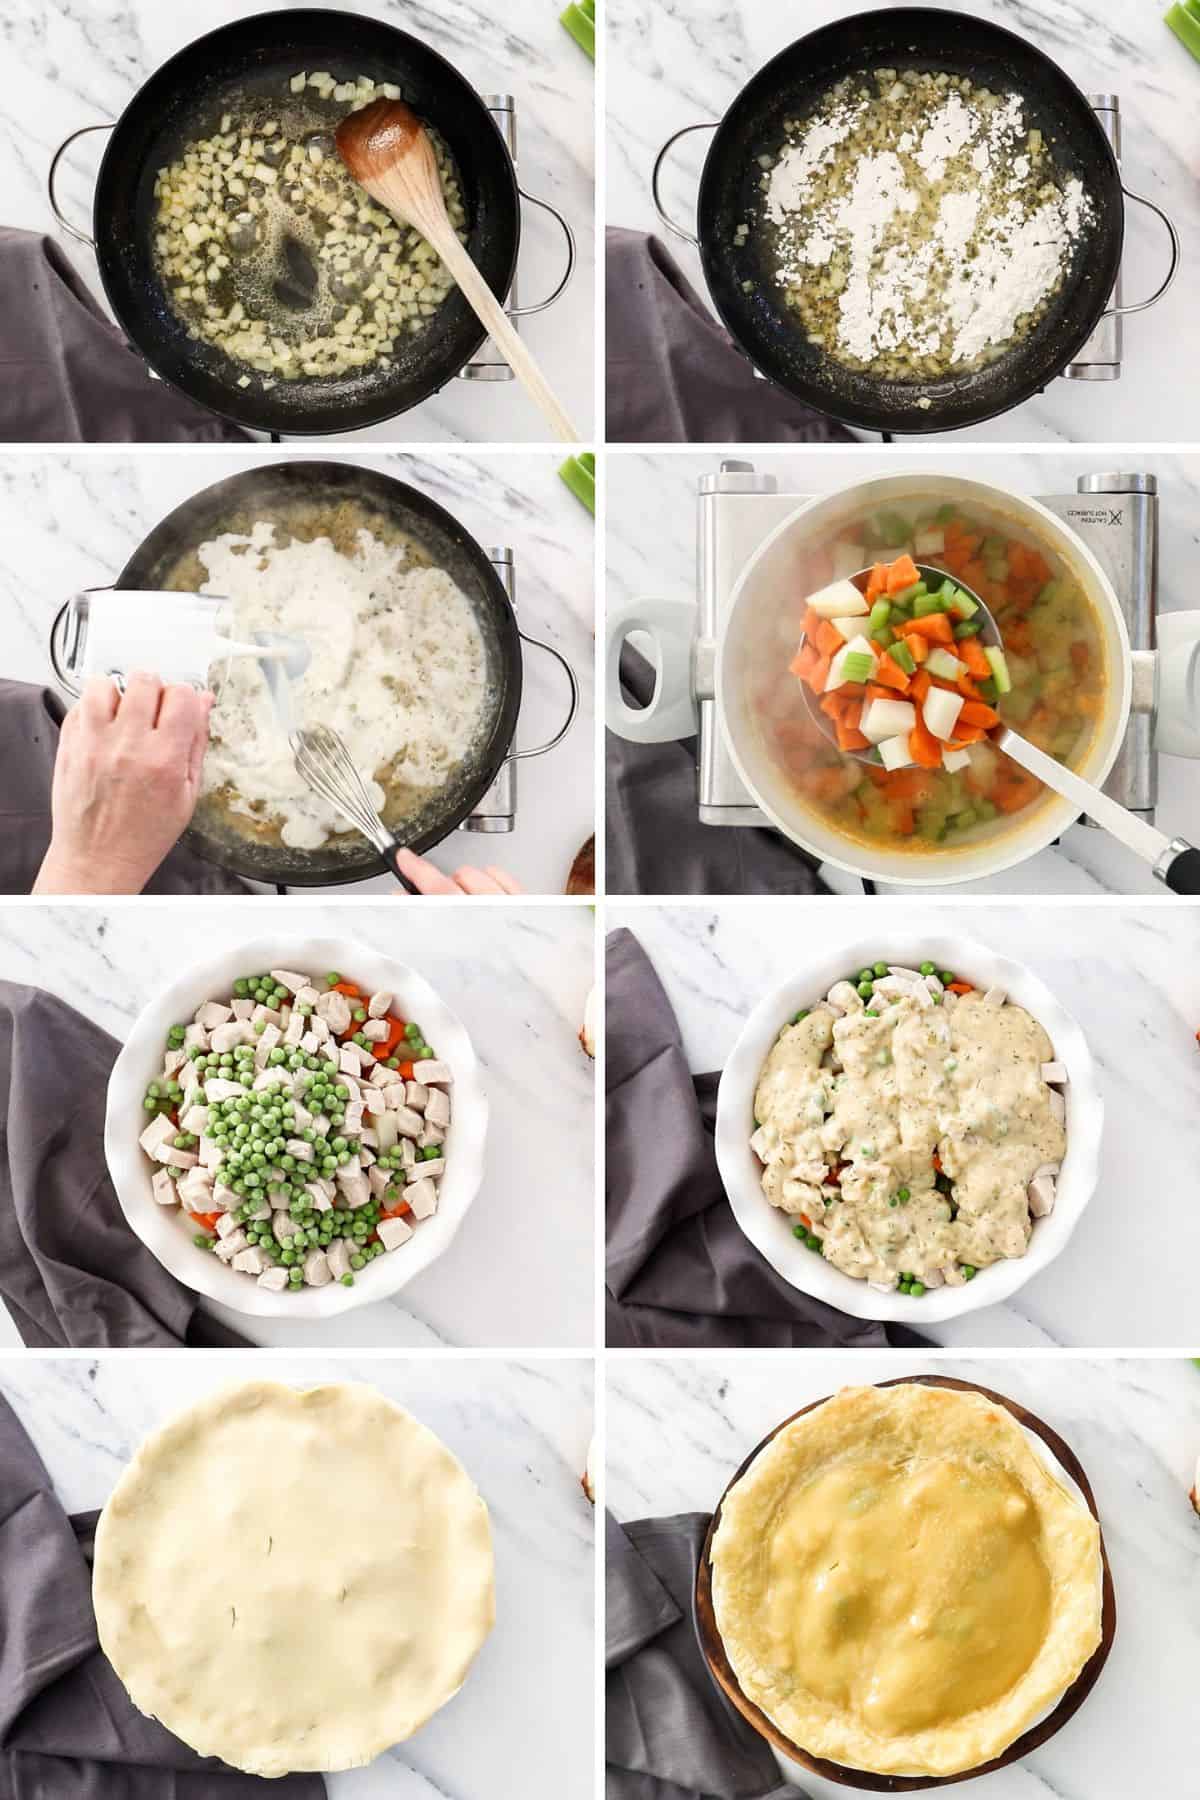 8 photos of the process of making a turkey pot pie.